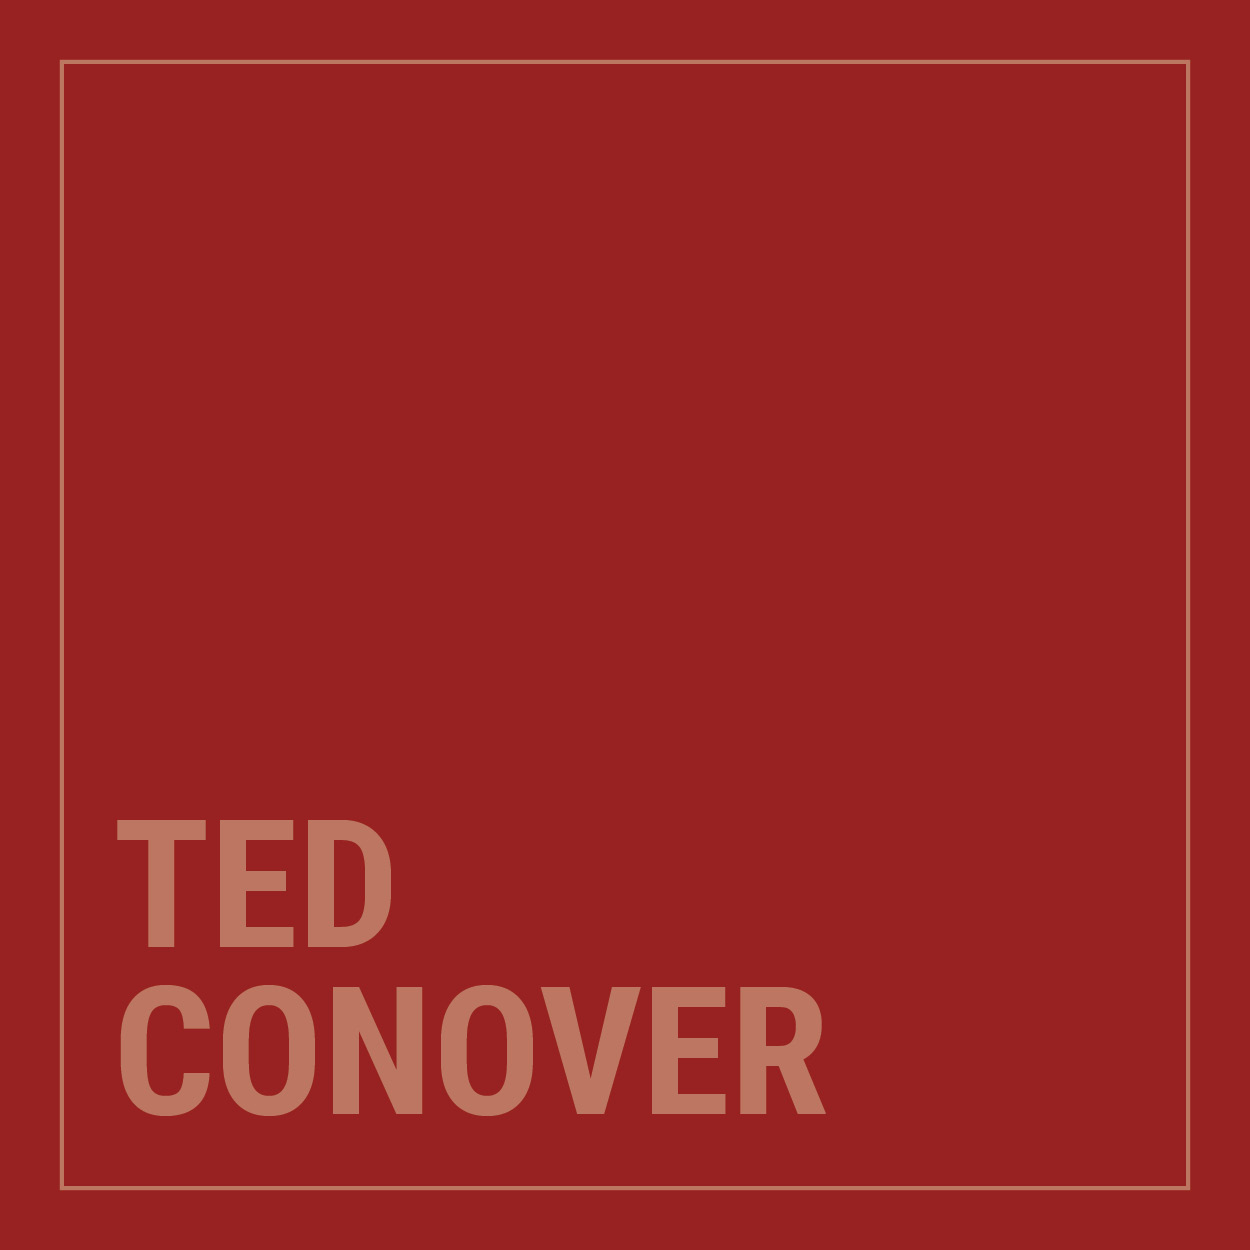 ted conover thumbnail placeholder in red